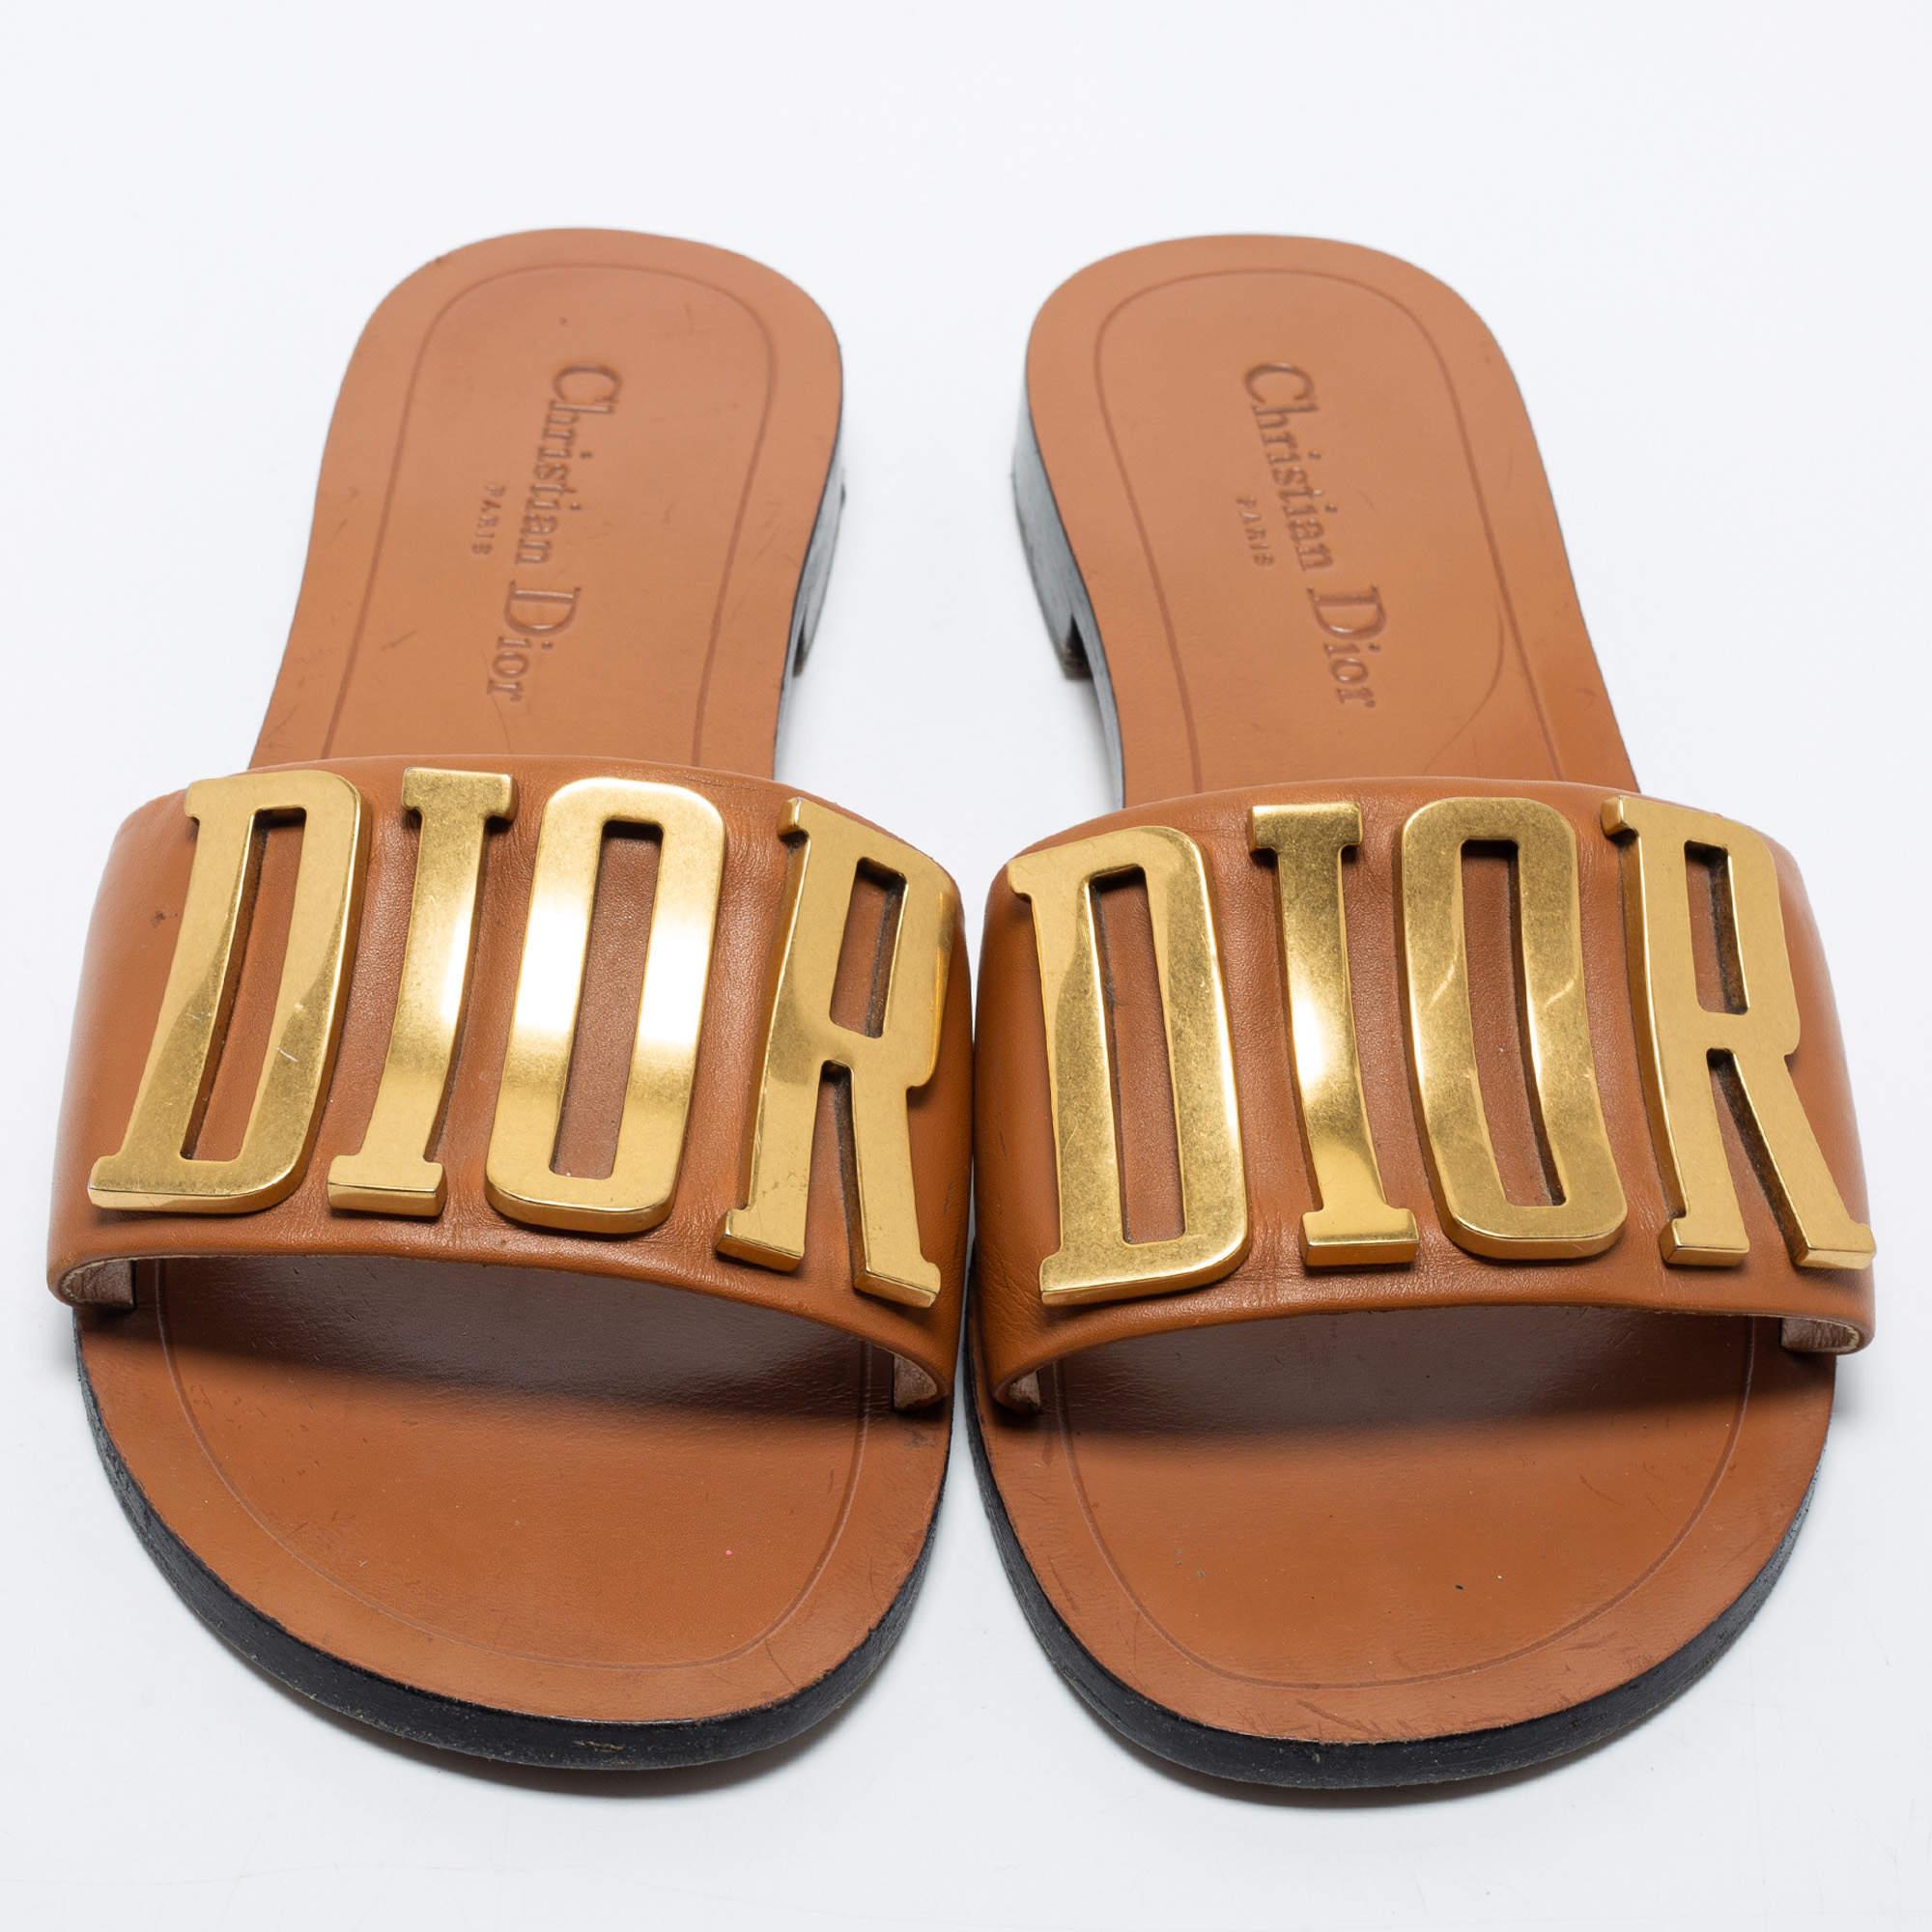 These slides will offer you a statement appeal. Made from premium materials, these shoes will lend a stylish twist to your outfit and aims to provide you with all-day comfort.

Includes: Original Dustbag
